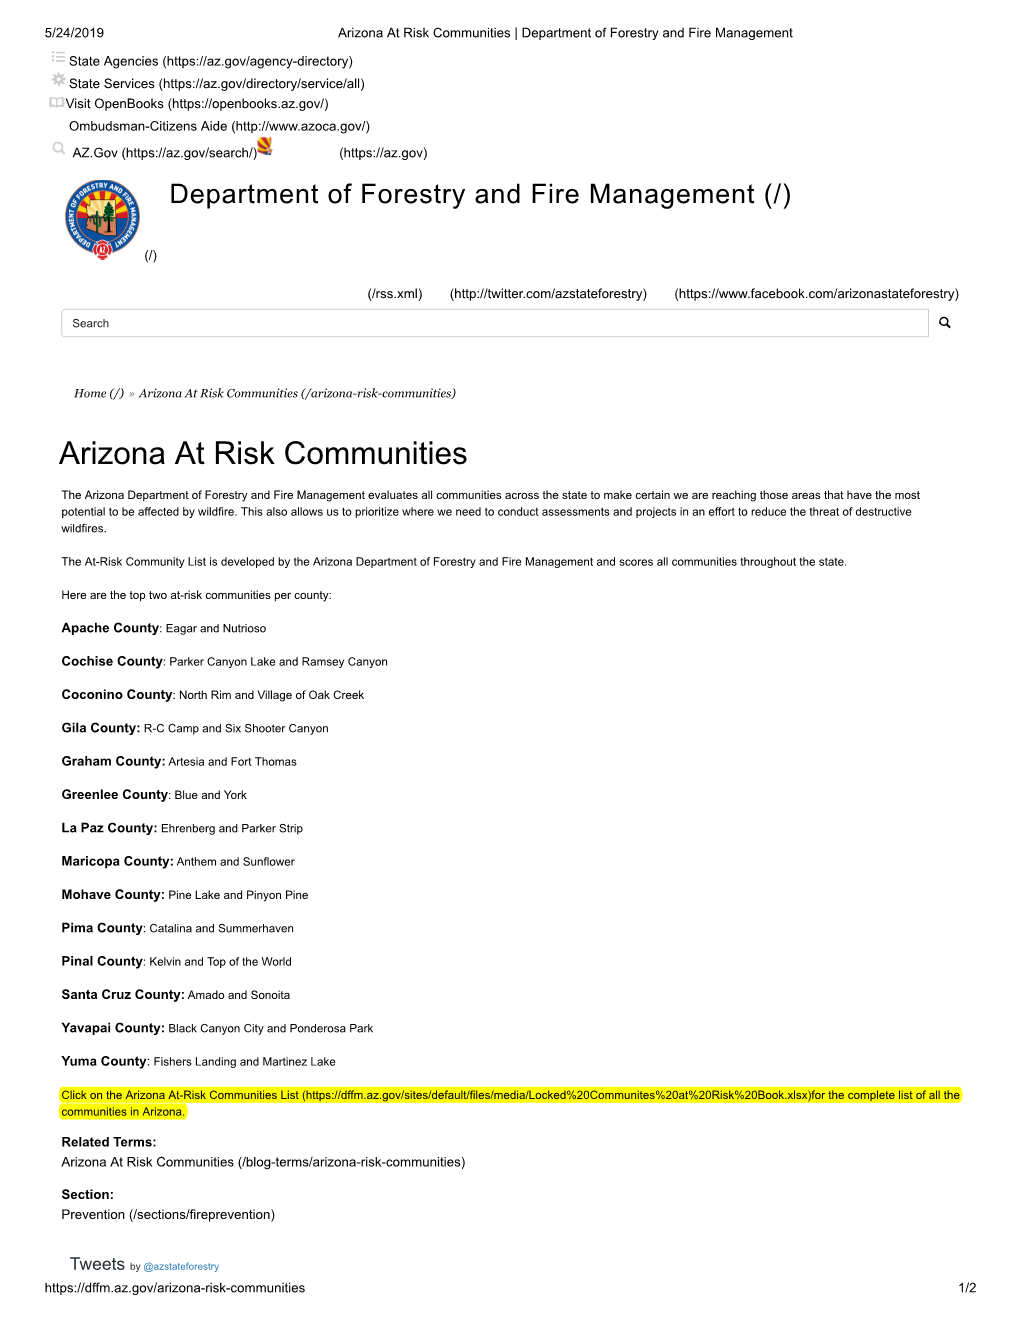 Arizona at Risk Communities | Department of Forestry and Fire Management